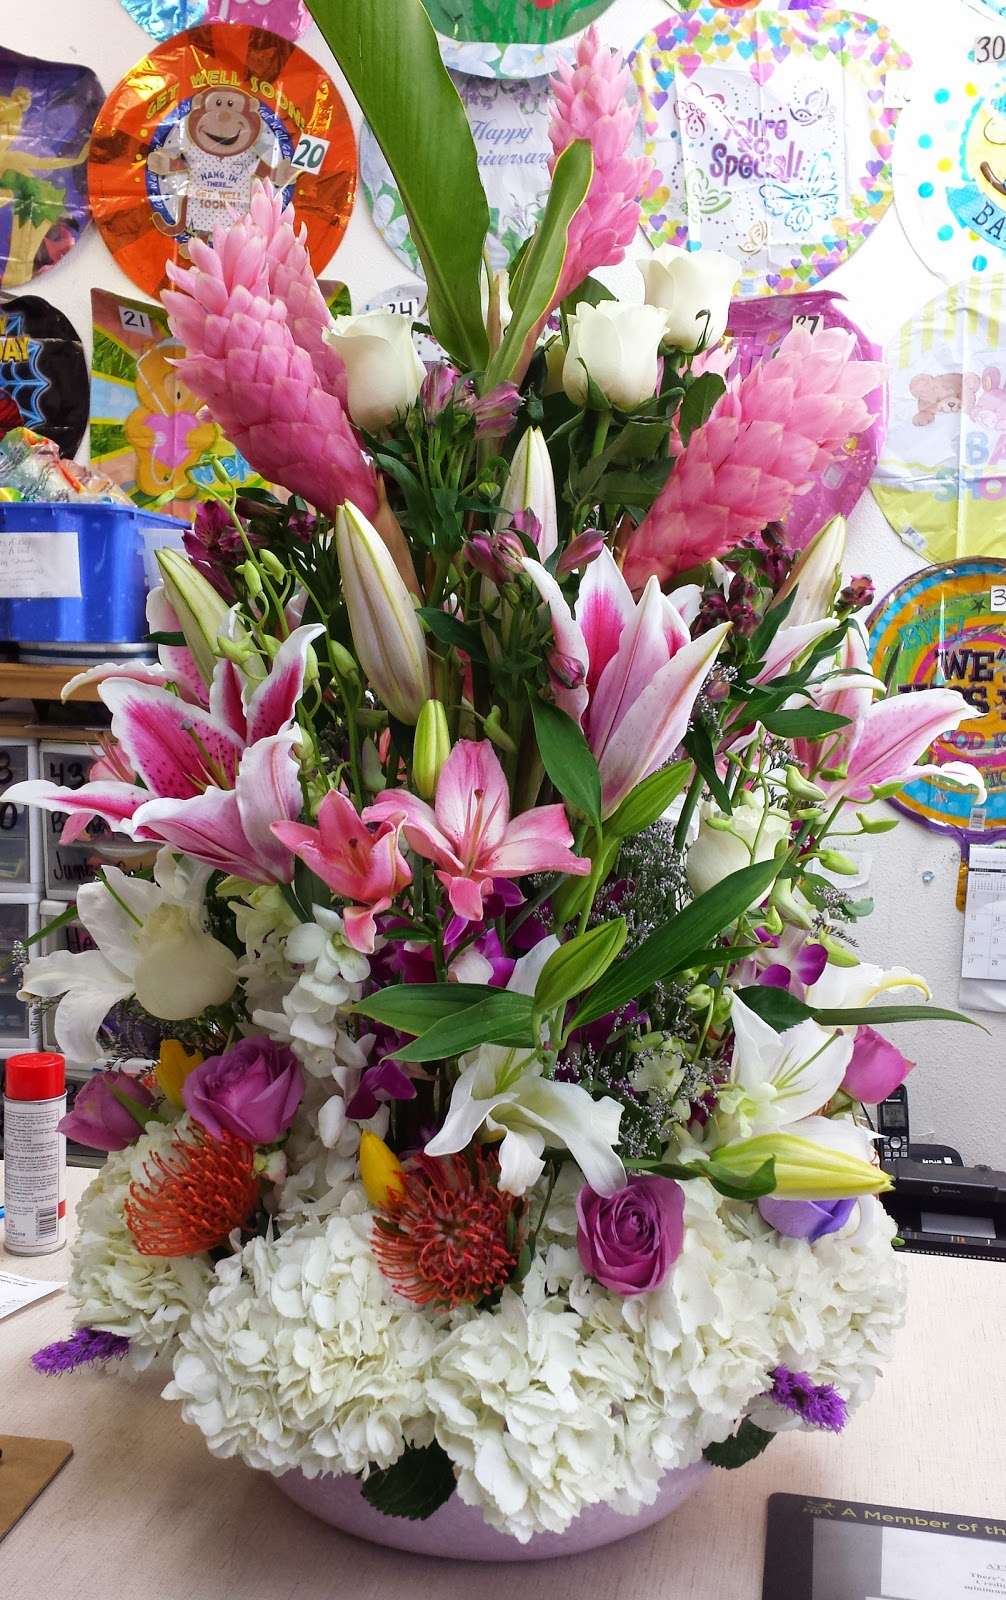 South East Flower Shop | 127 W Manchester Ave unit#4, Los Angeles, CA 90003, USA | Phone: (323) 759-0575